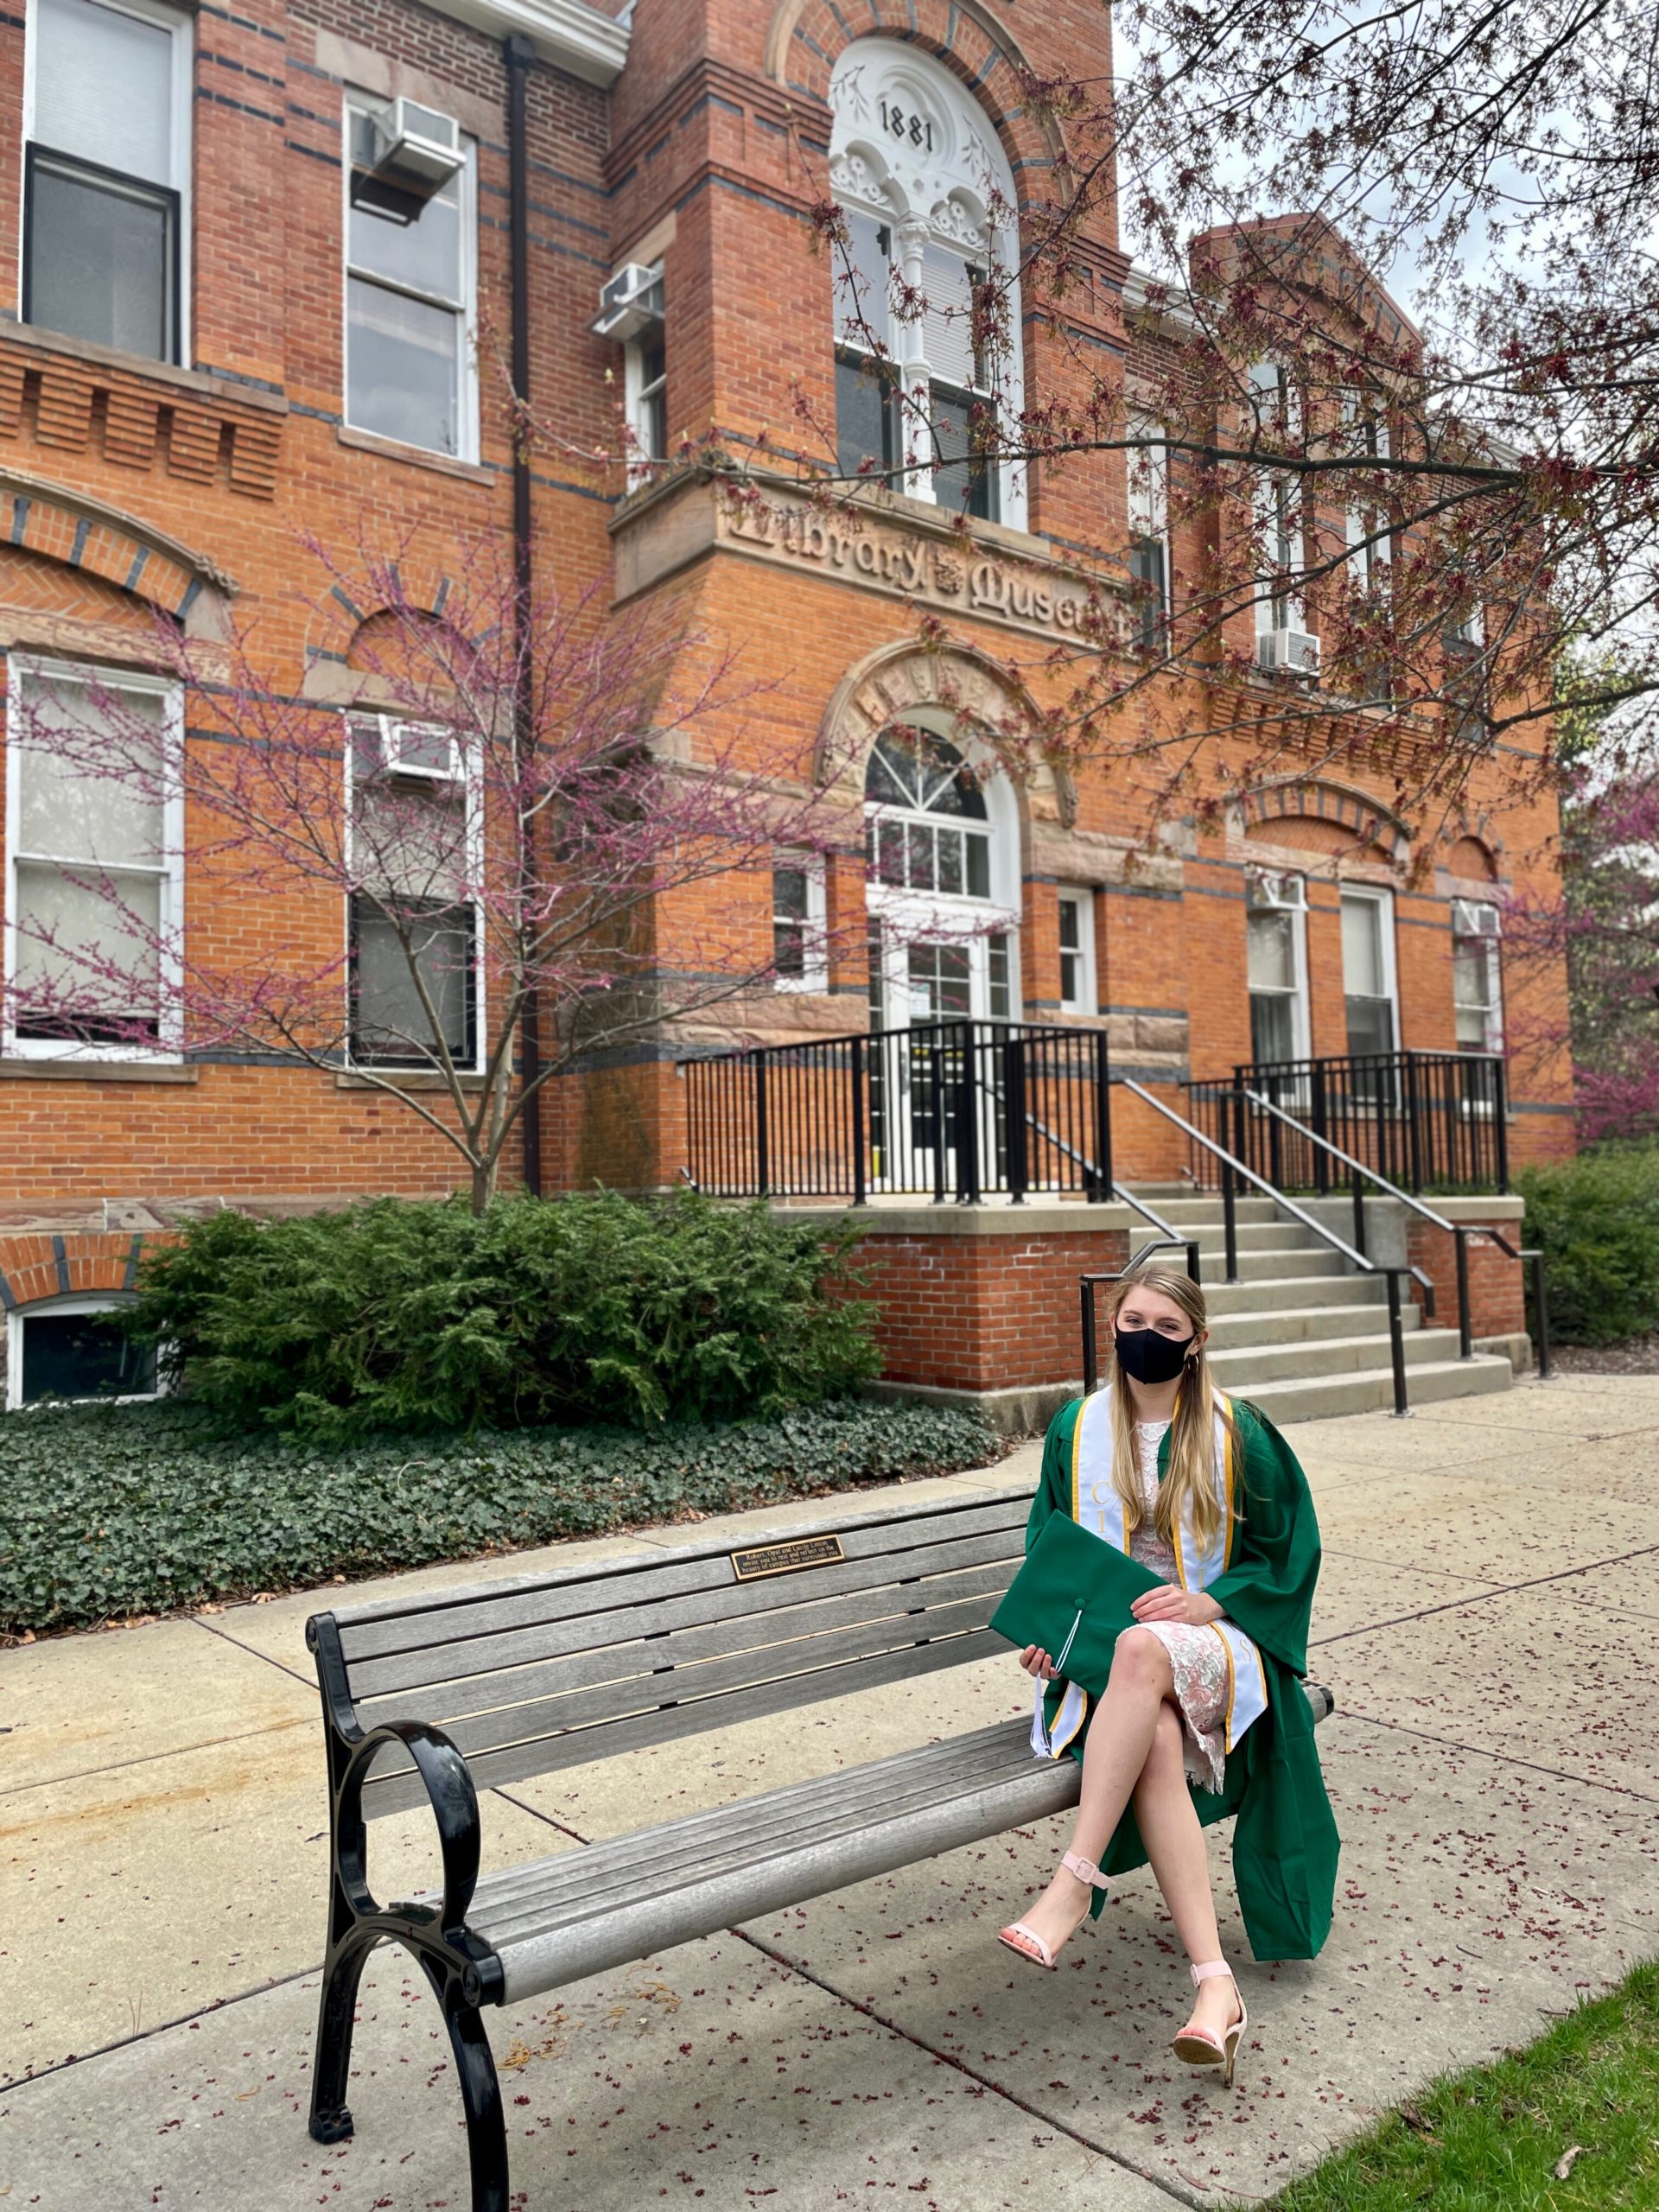 a girl with long blonde hair wearing a green gown sitting on a bench